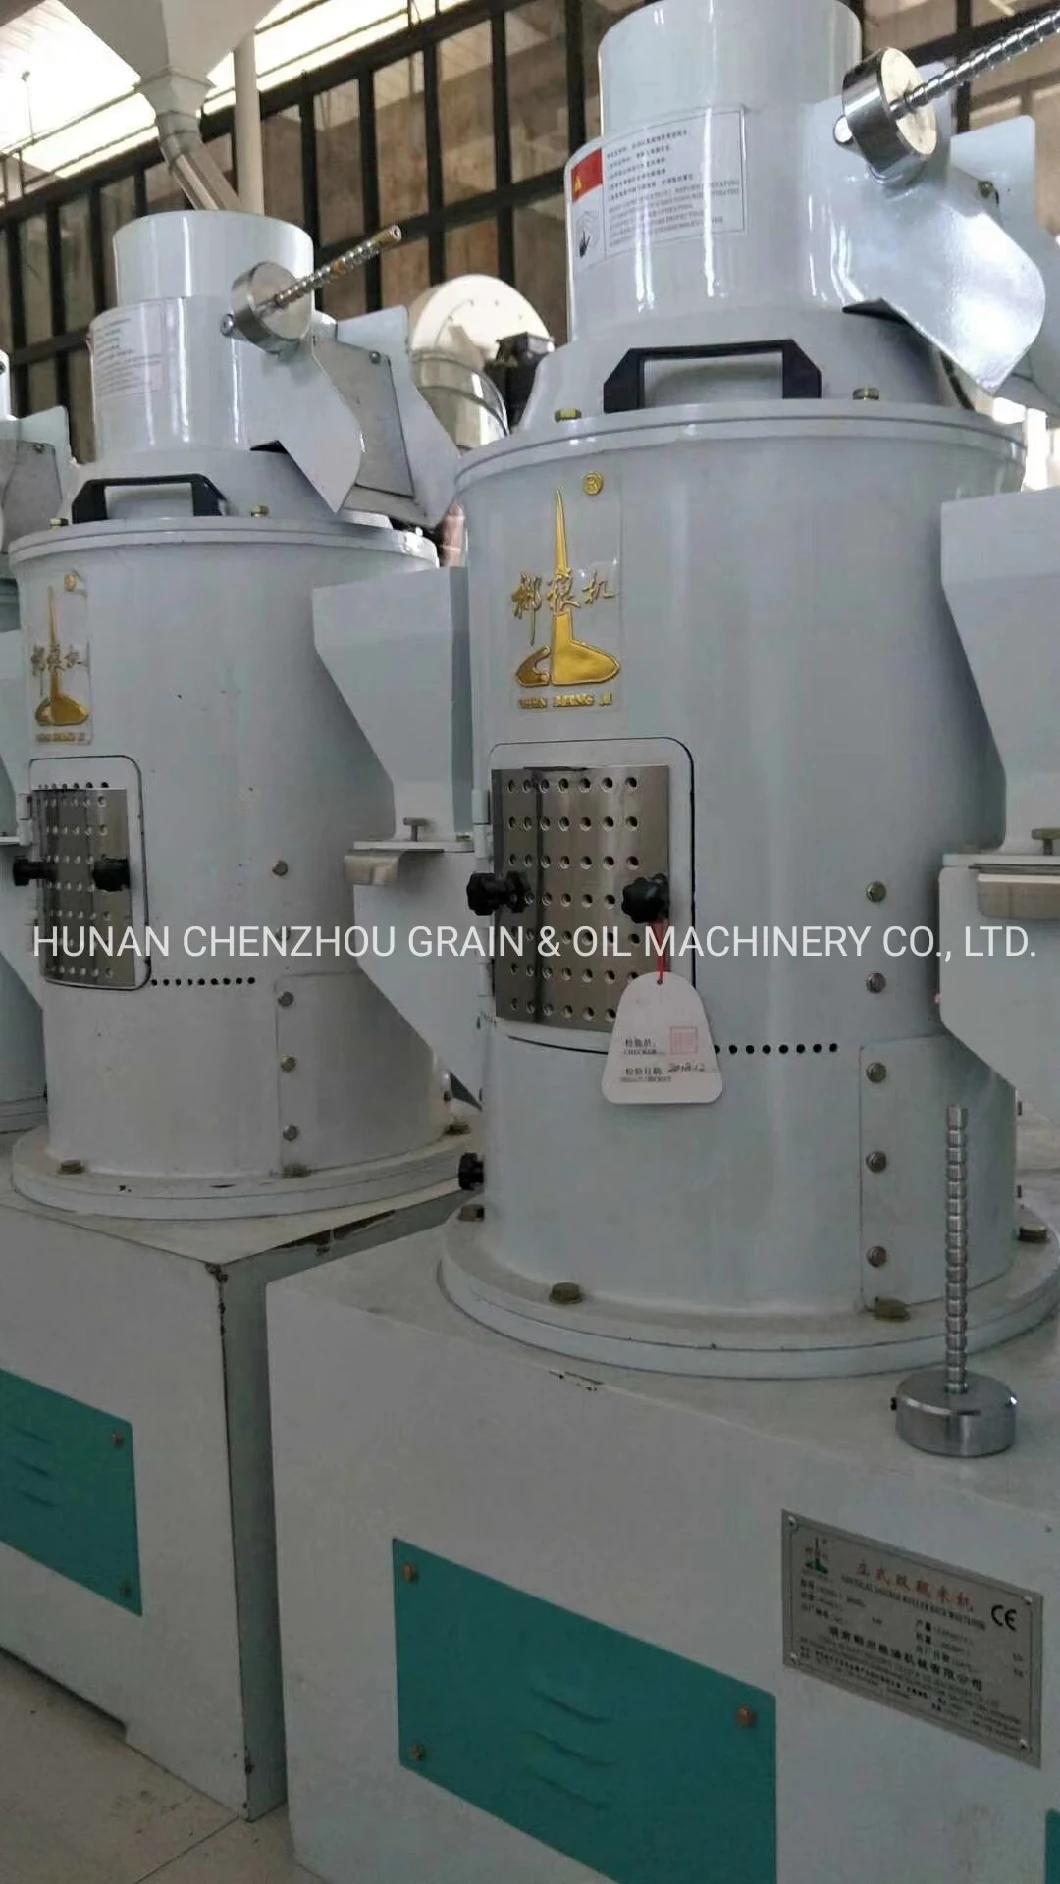 Clj Hot Sale Complete Buckwheat Milling Machinery Auto Milling Line Rice Mill Machine